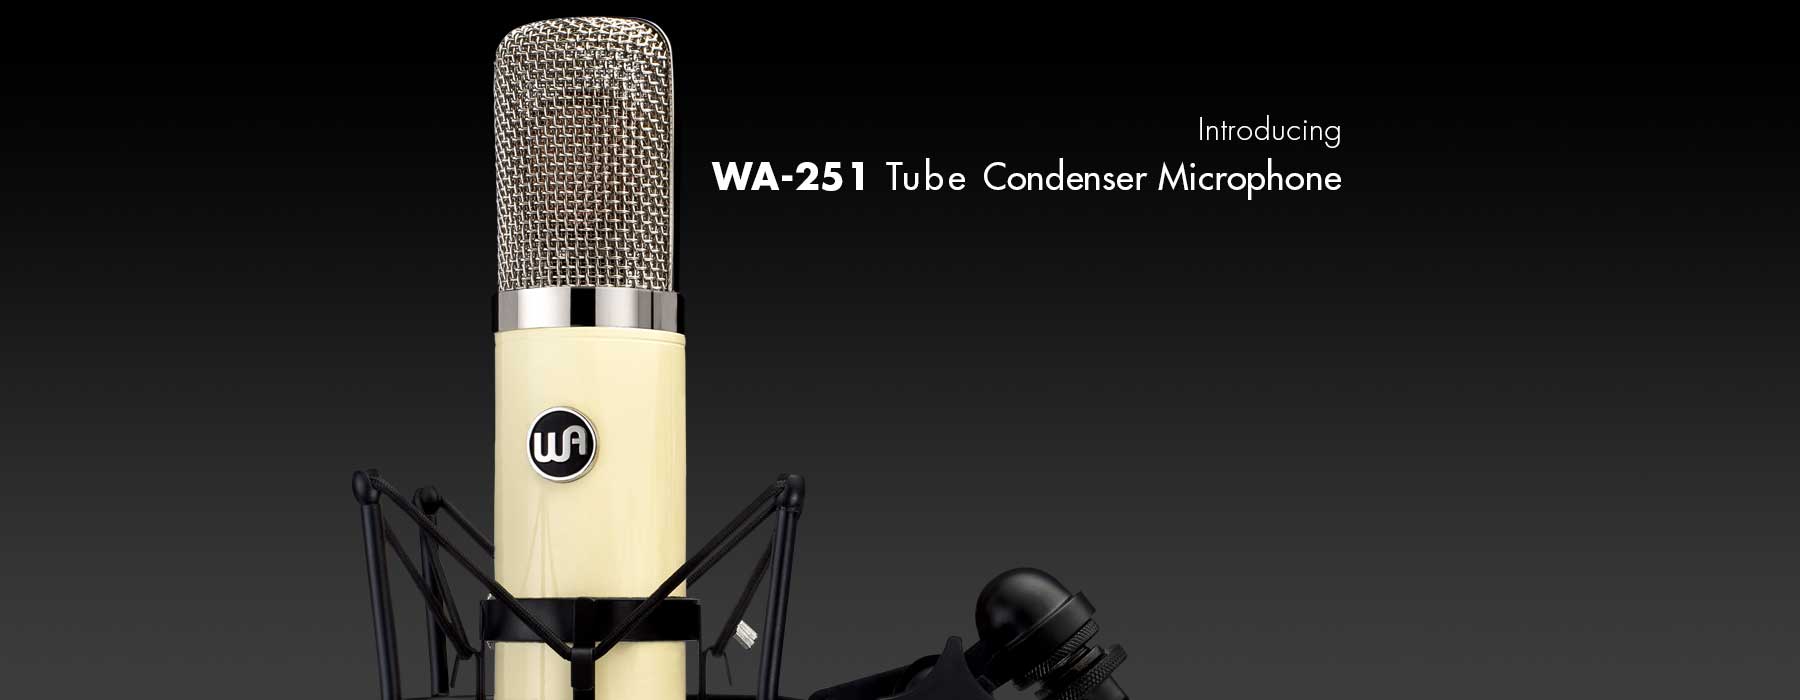 Warm Audio introduces the WA-251 Tube Condenser Microphone